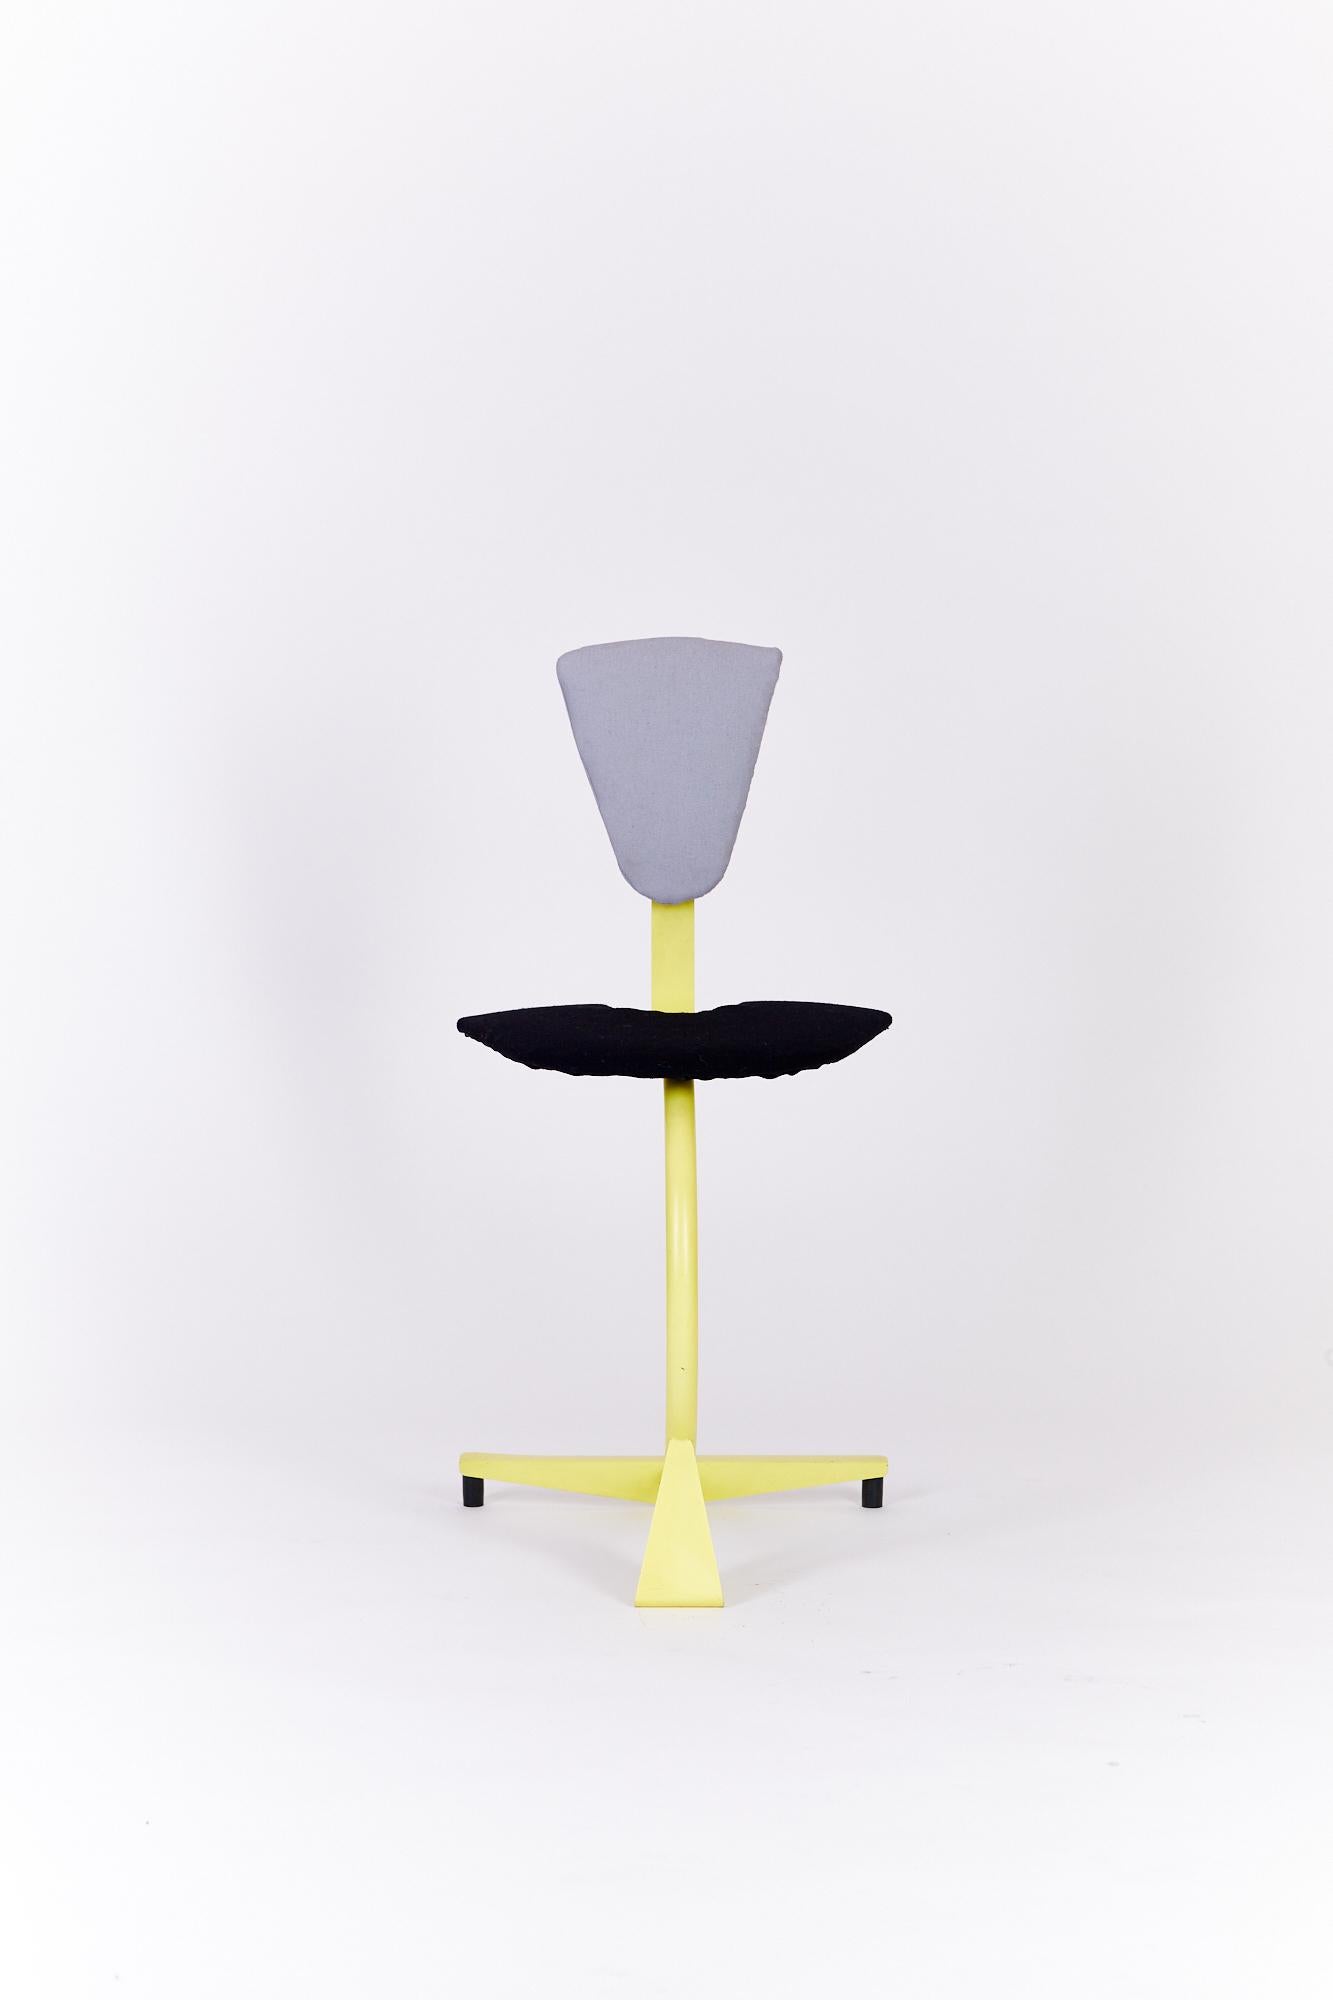 Postmodern yellow chair designed in the 1980's. It's made of a metal structure, with a chair seat and back upholstery.

Unknown designer
